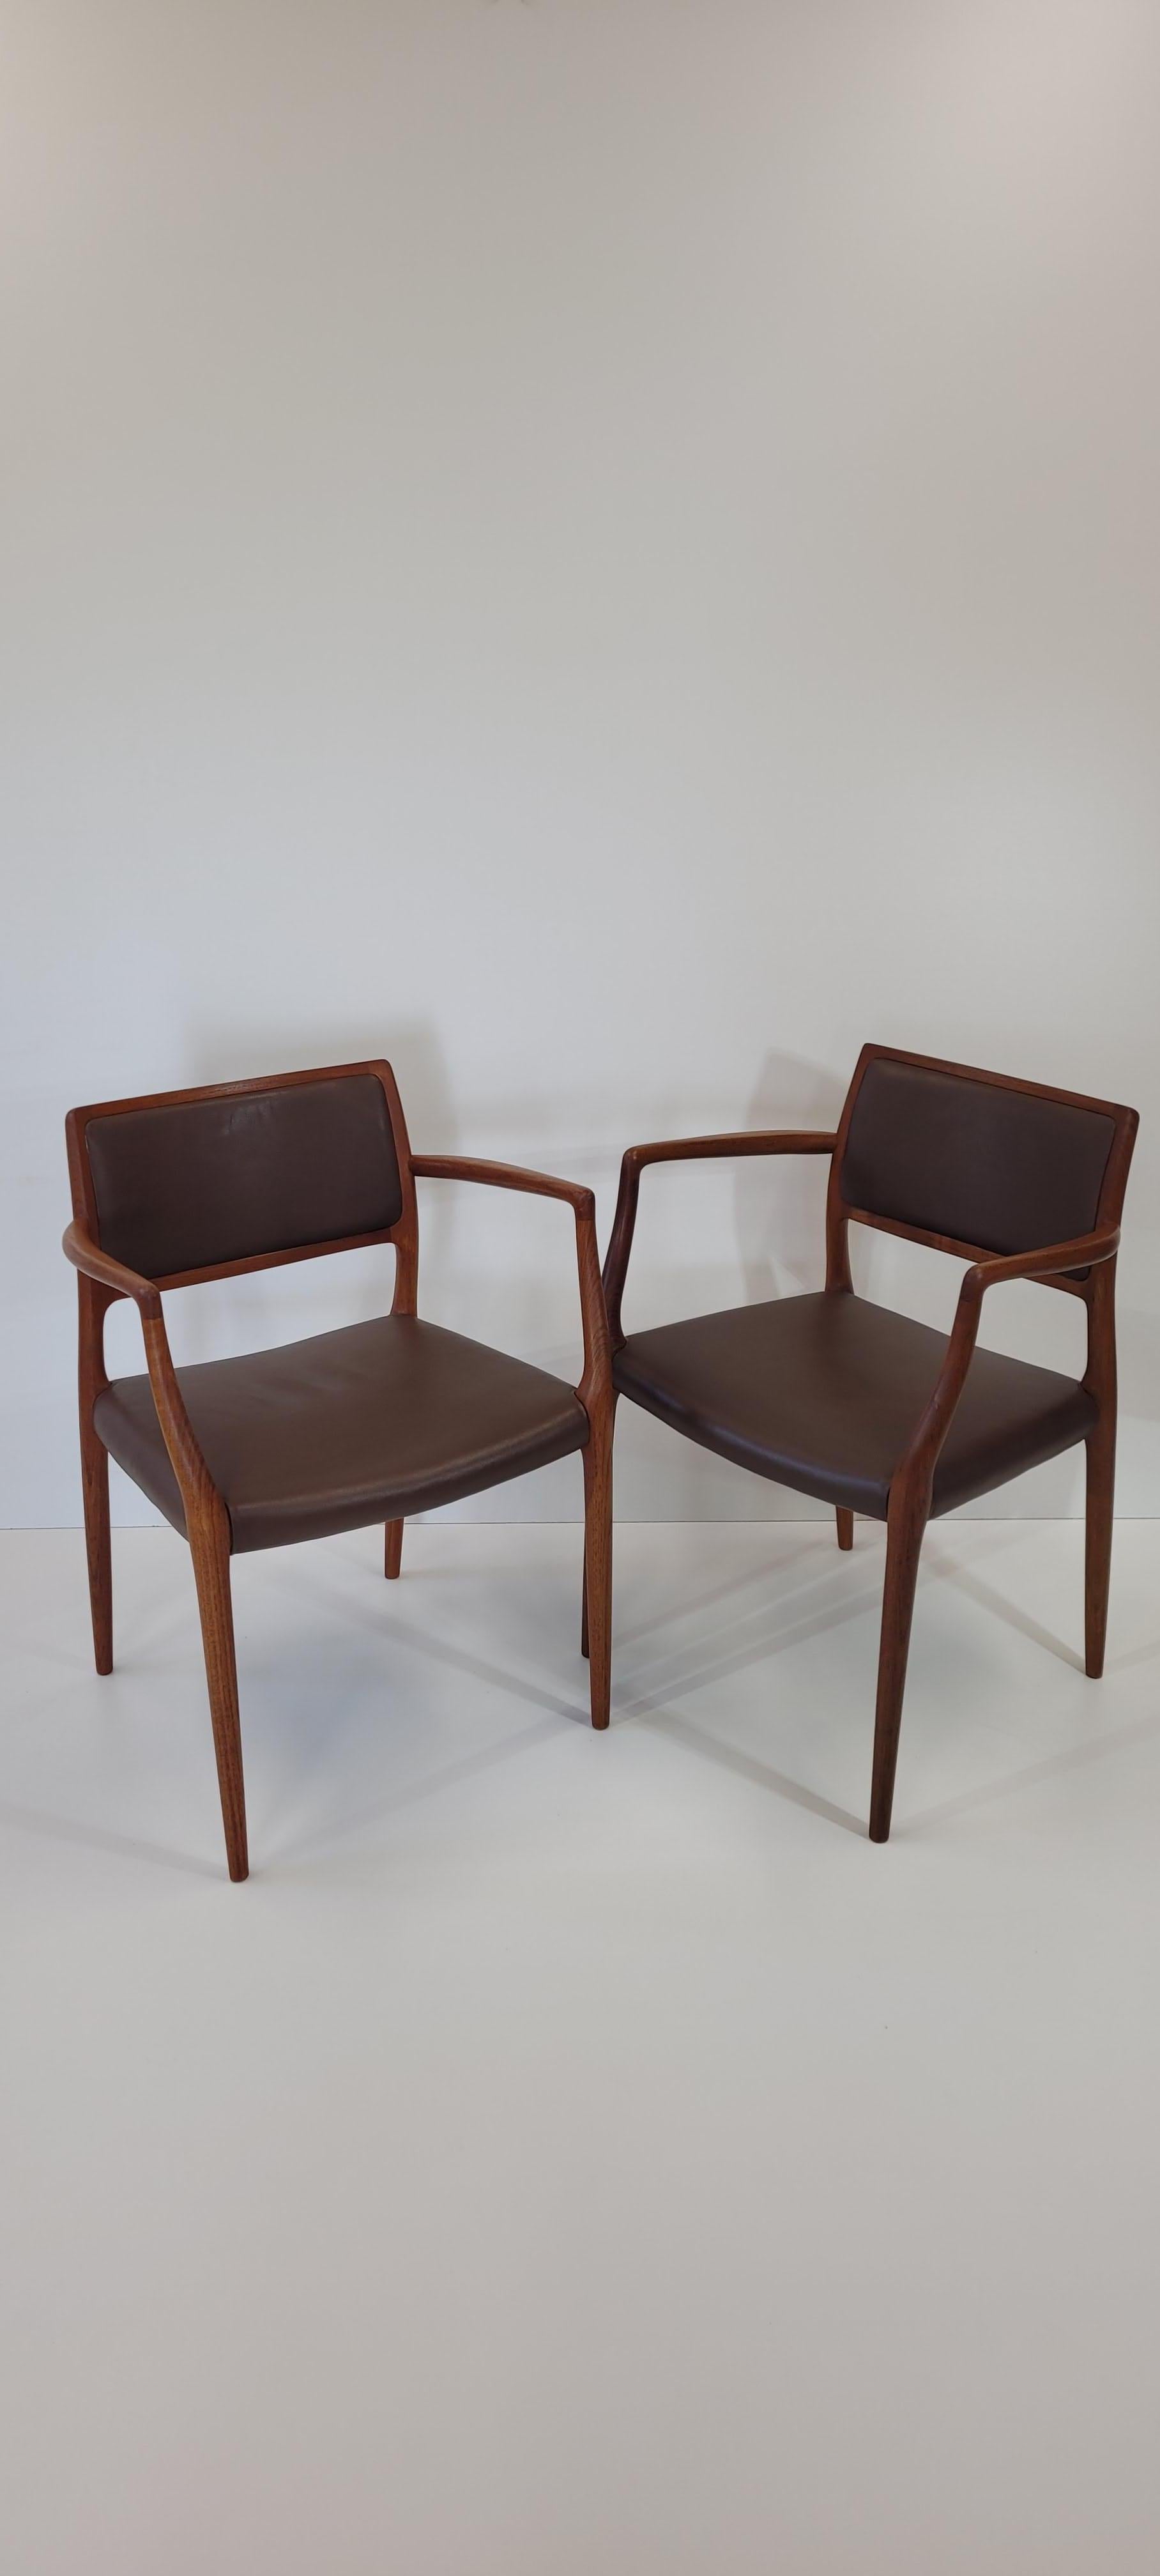 Pair of Model 65 Dining Chair in Teak and Leather by Niels Otto Møller   For Sale 2